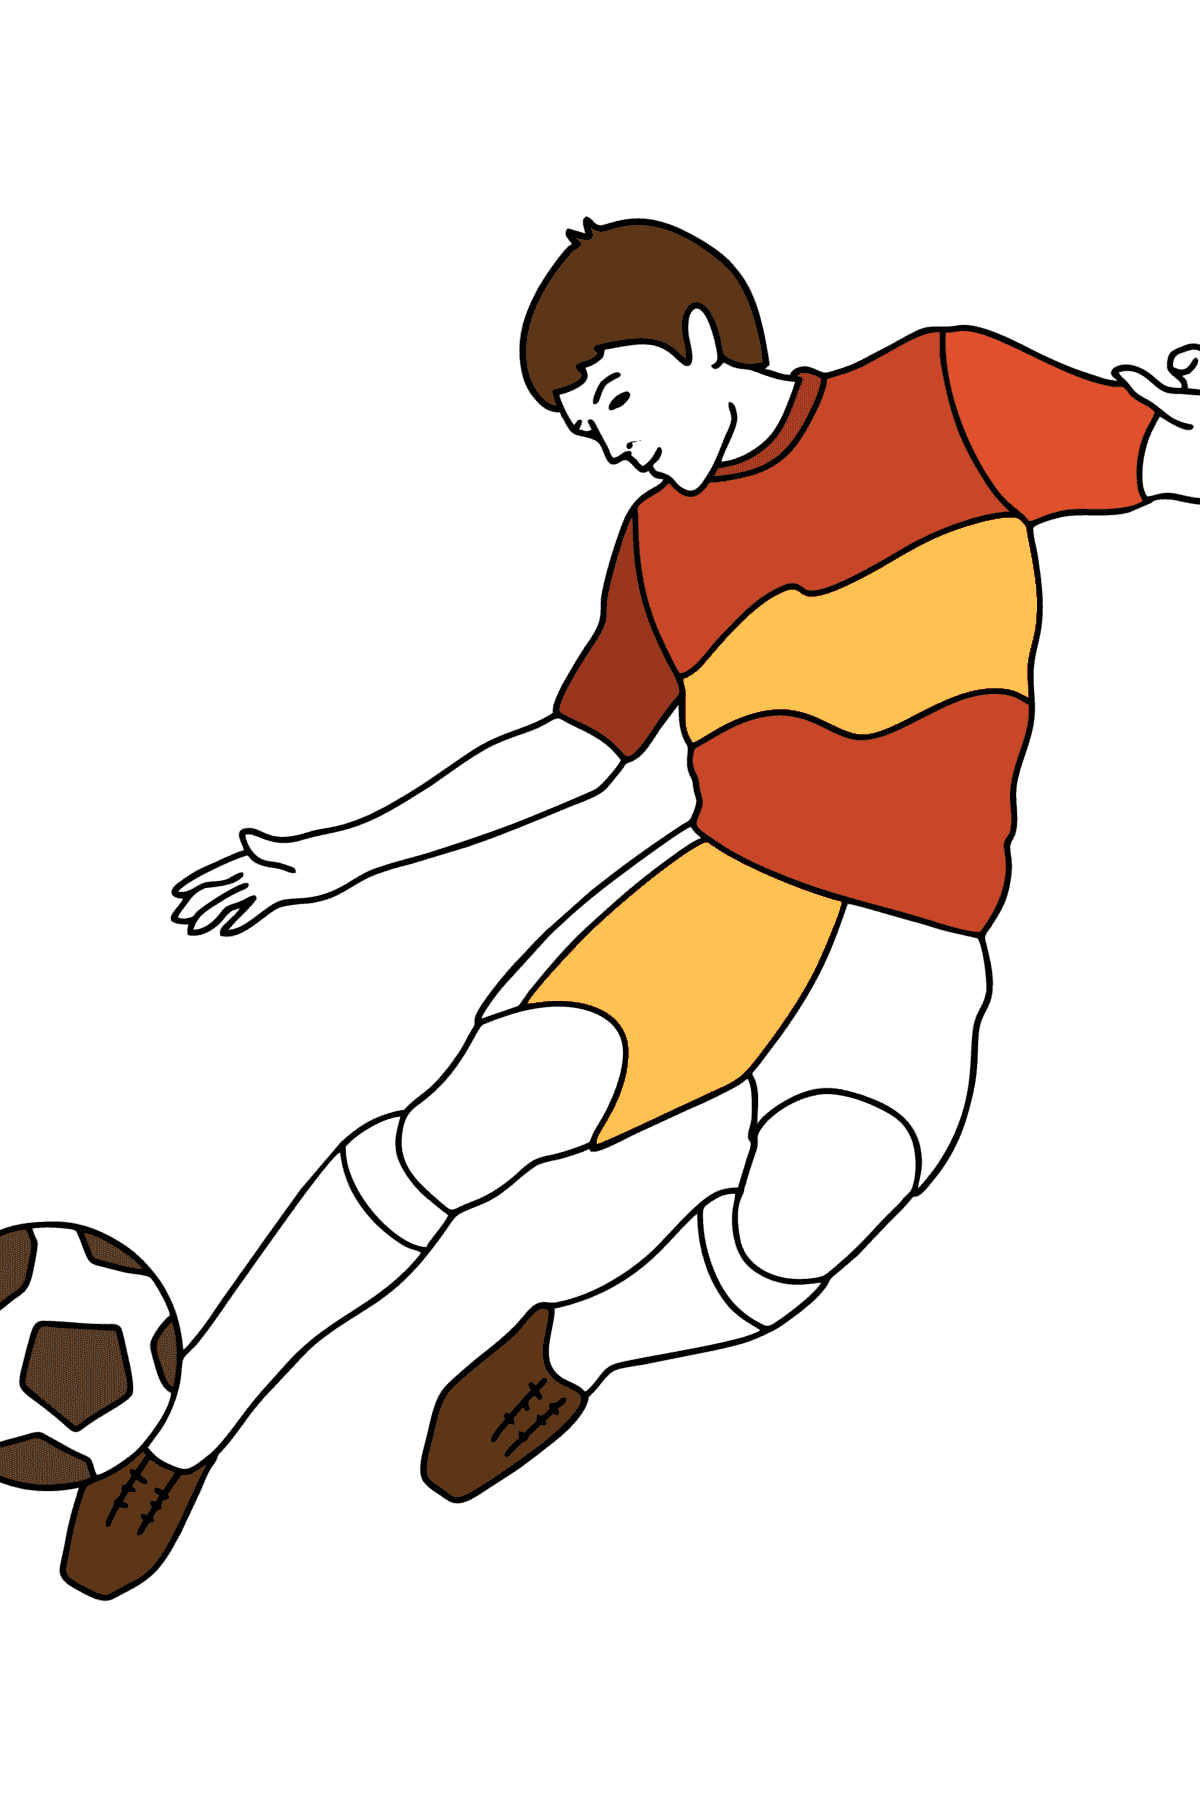 UEFA Professional Footballer сoloring page - Coloring Pages for Kids